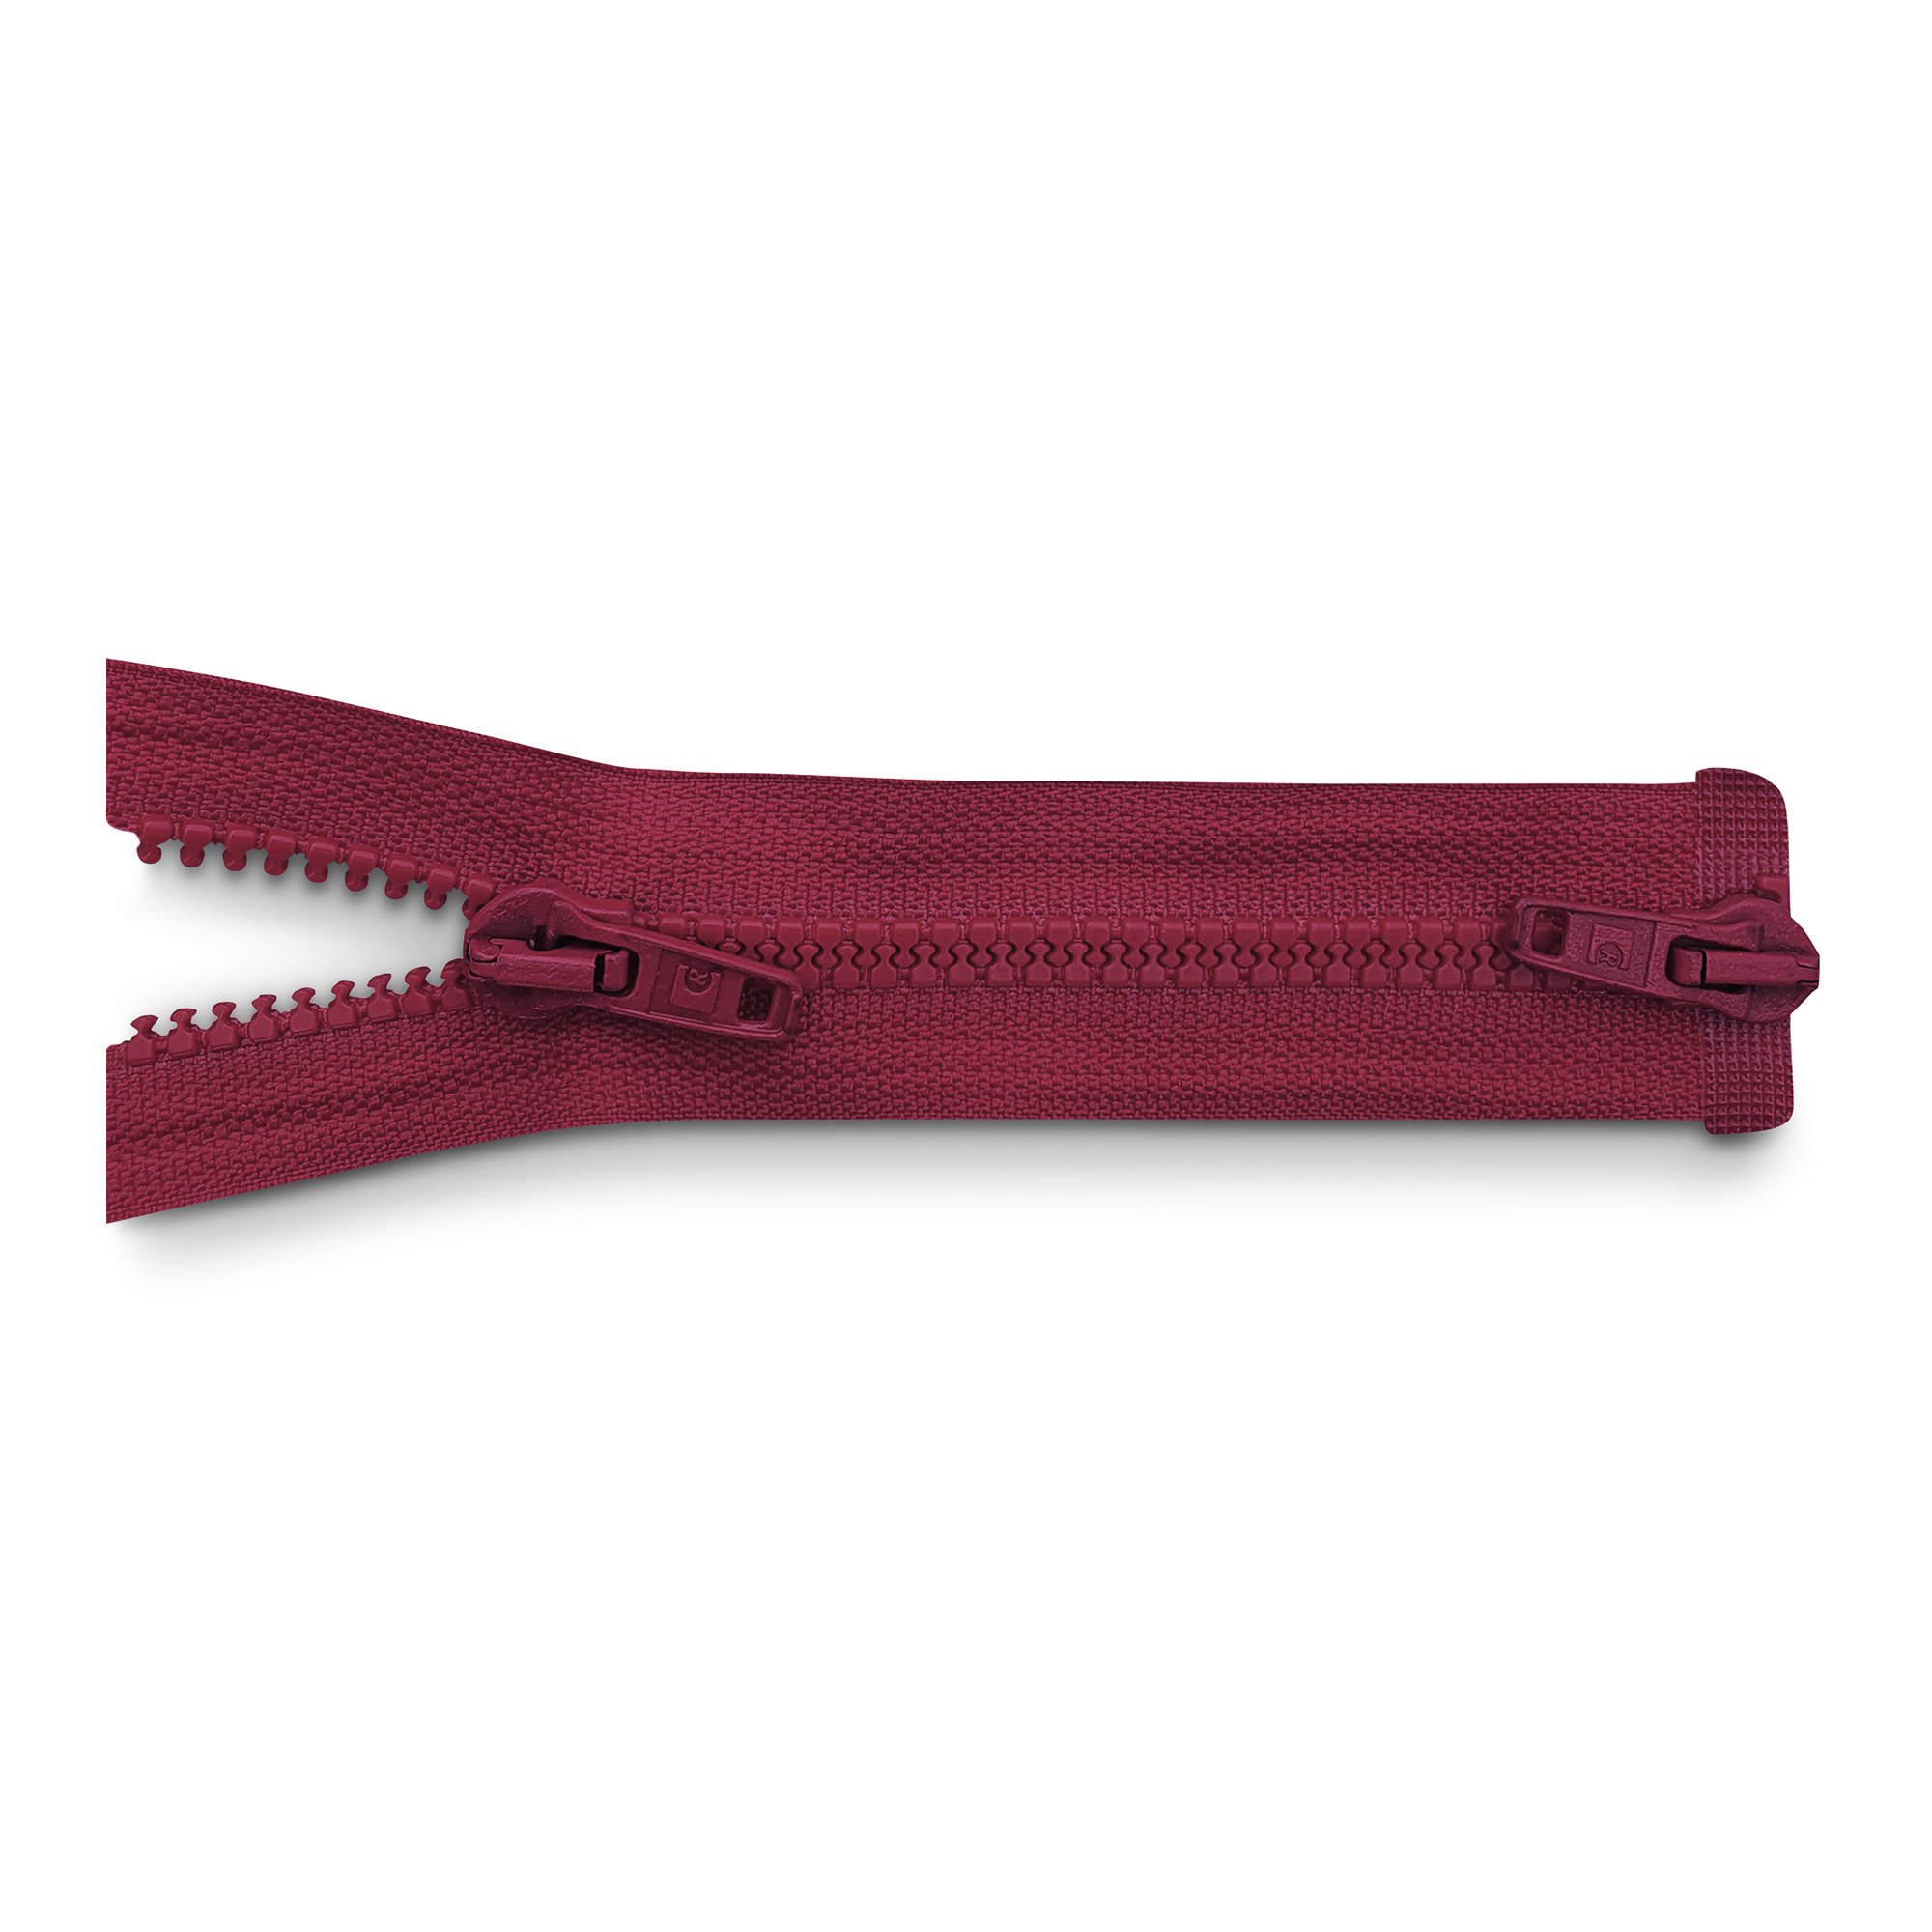 zipper 80cm,   divisible, 2way, molded plastic, wide, wine red